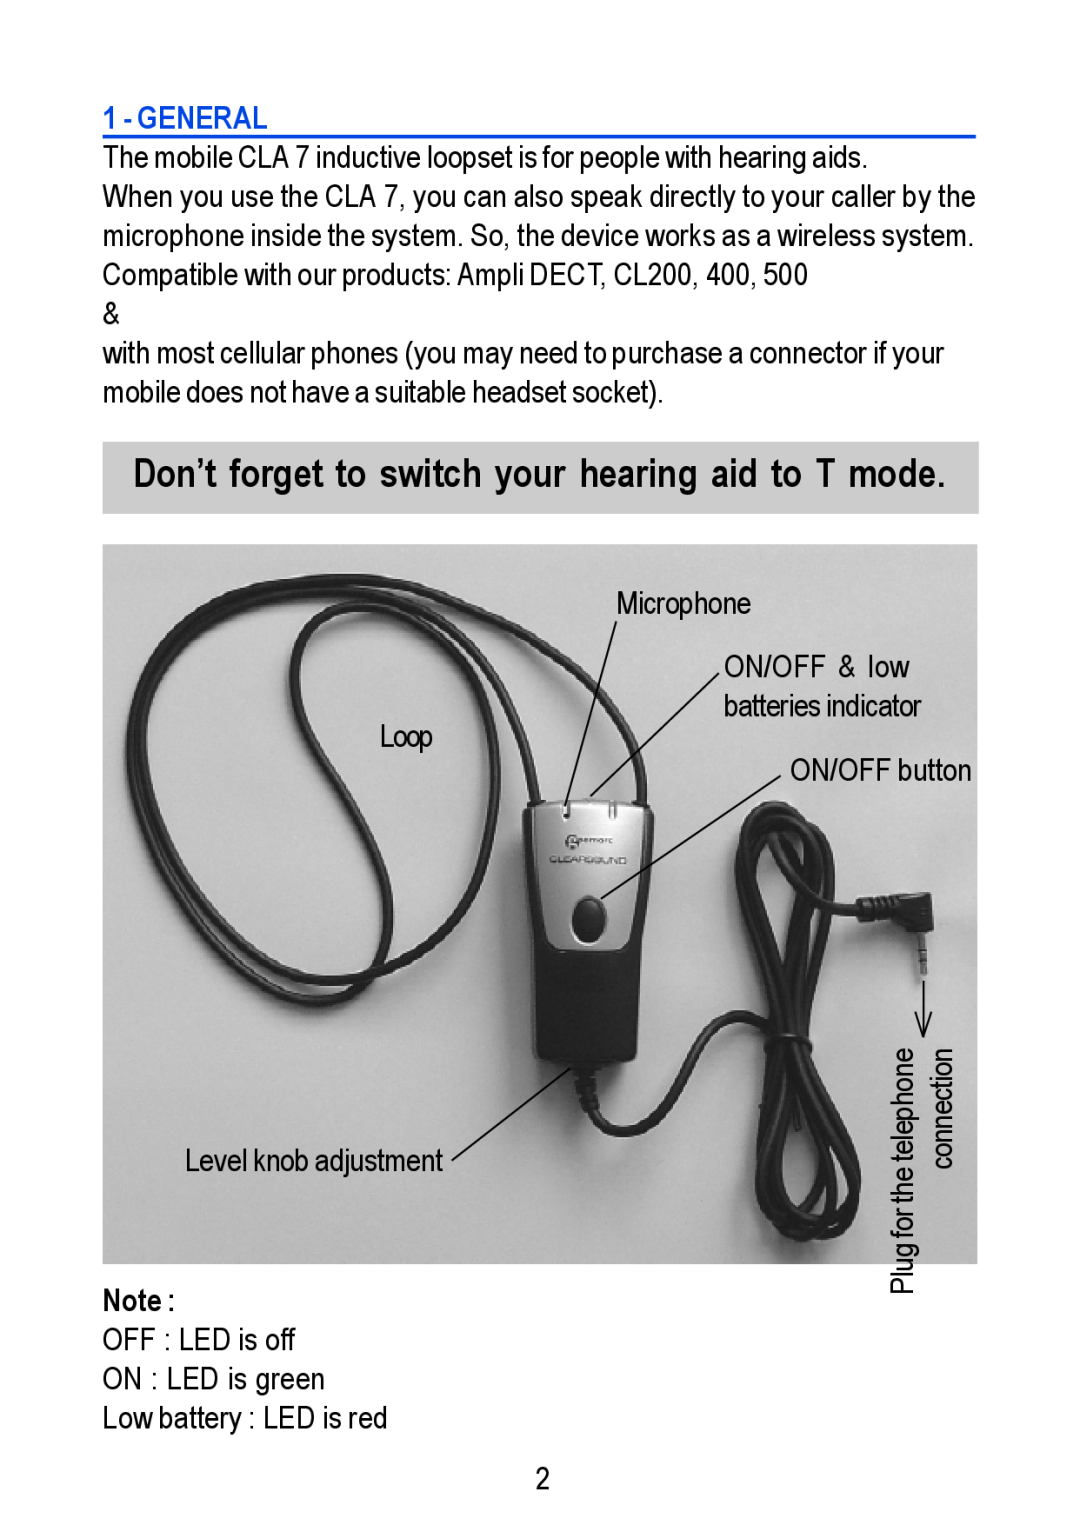 Geemarc CLA 7 manual Don’t forget to switch your hearing aid to T mode, General 